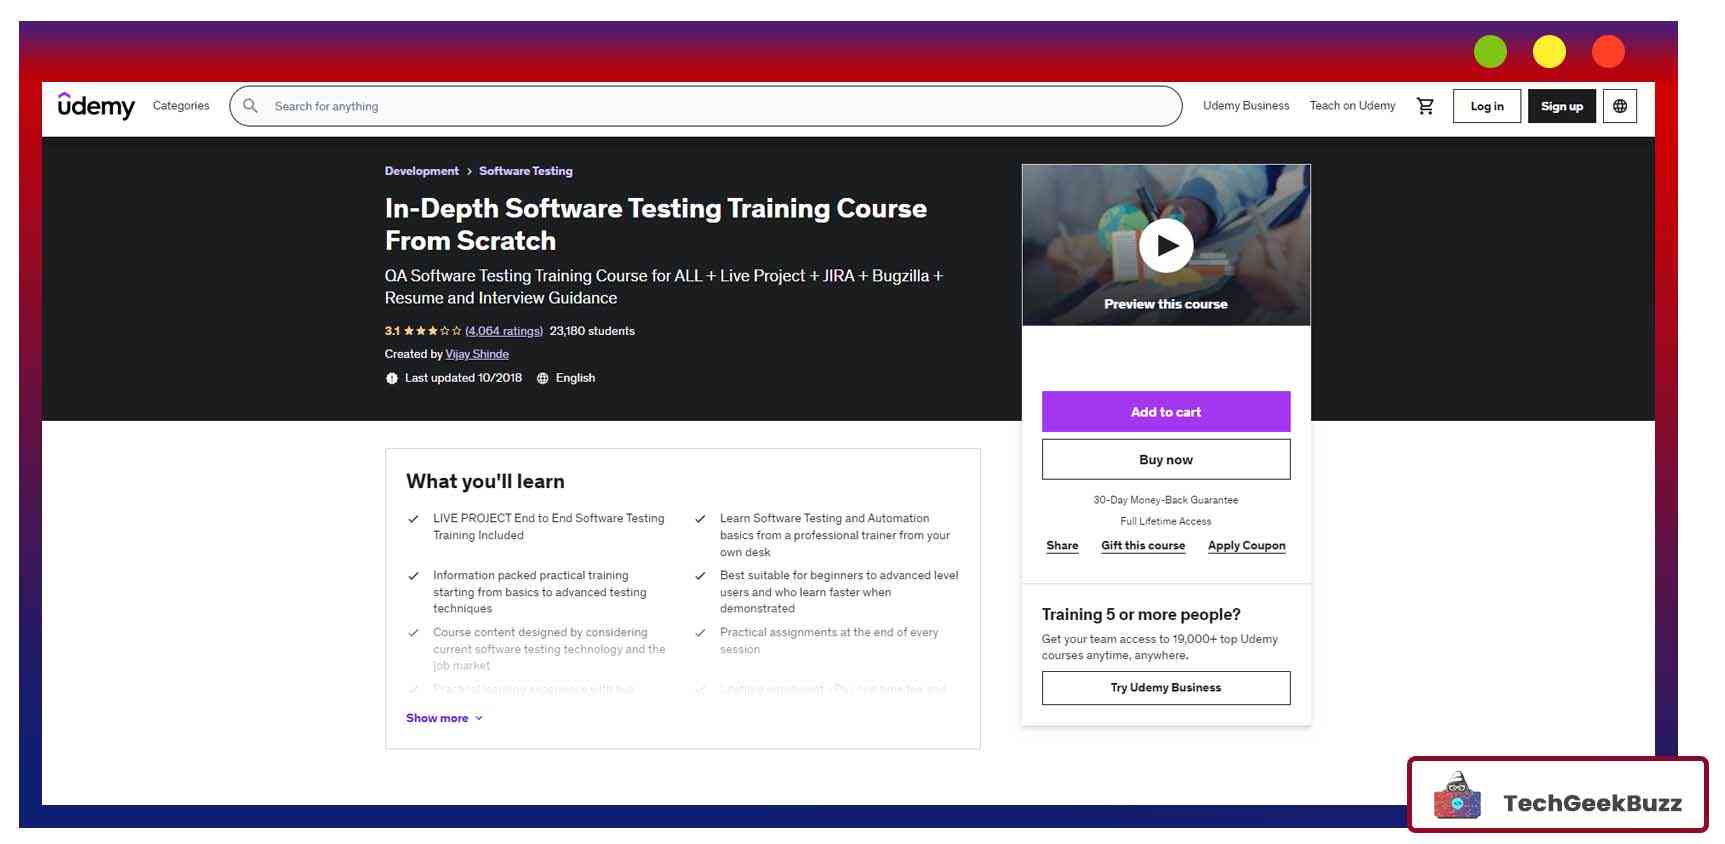 In-Depth Software Testing Training Course From Scratch